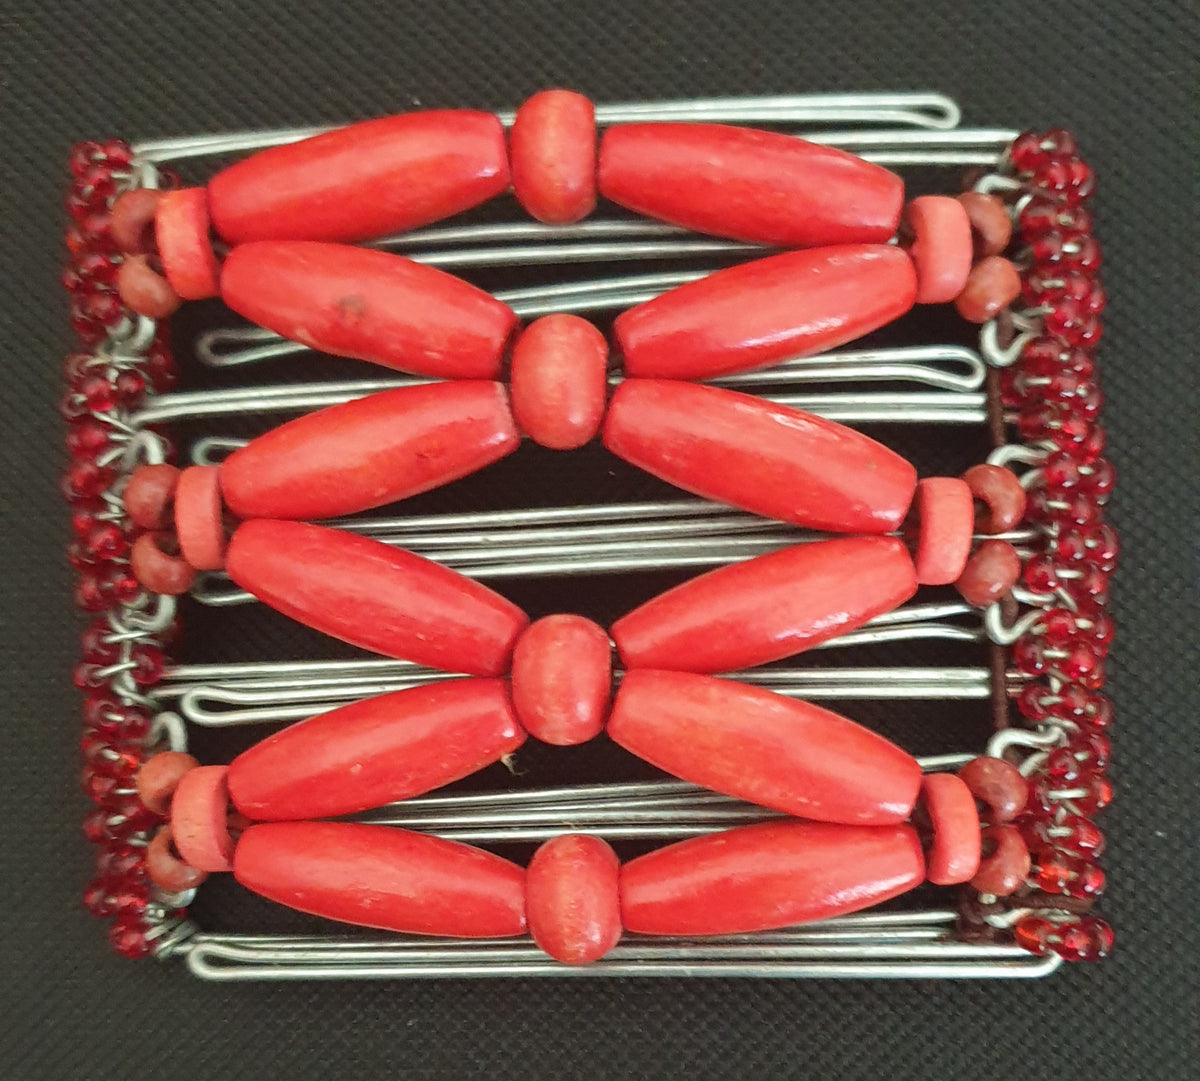 7 TOOTH HAIR COMBS